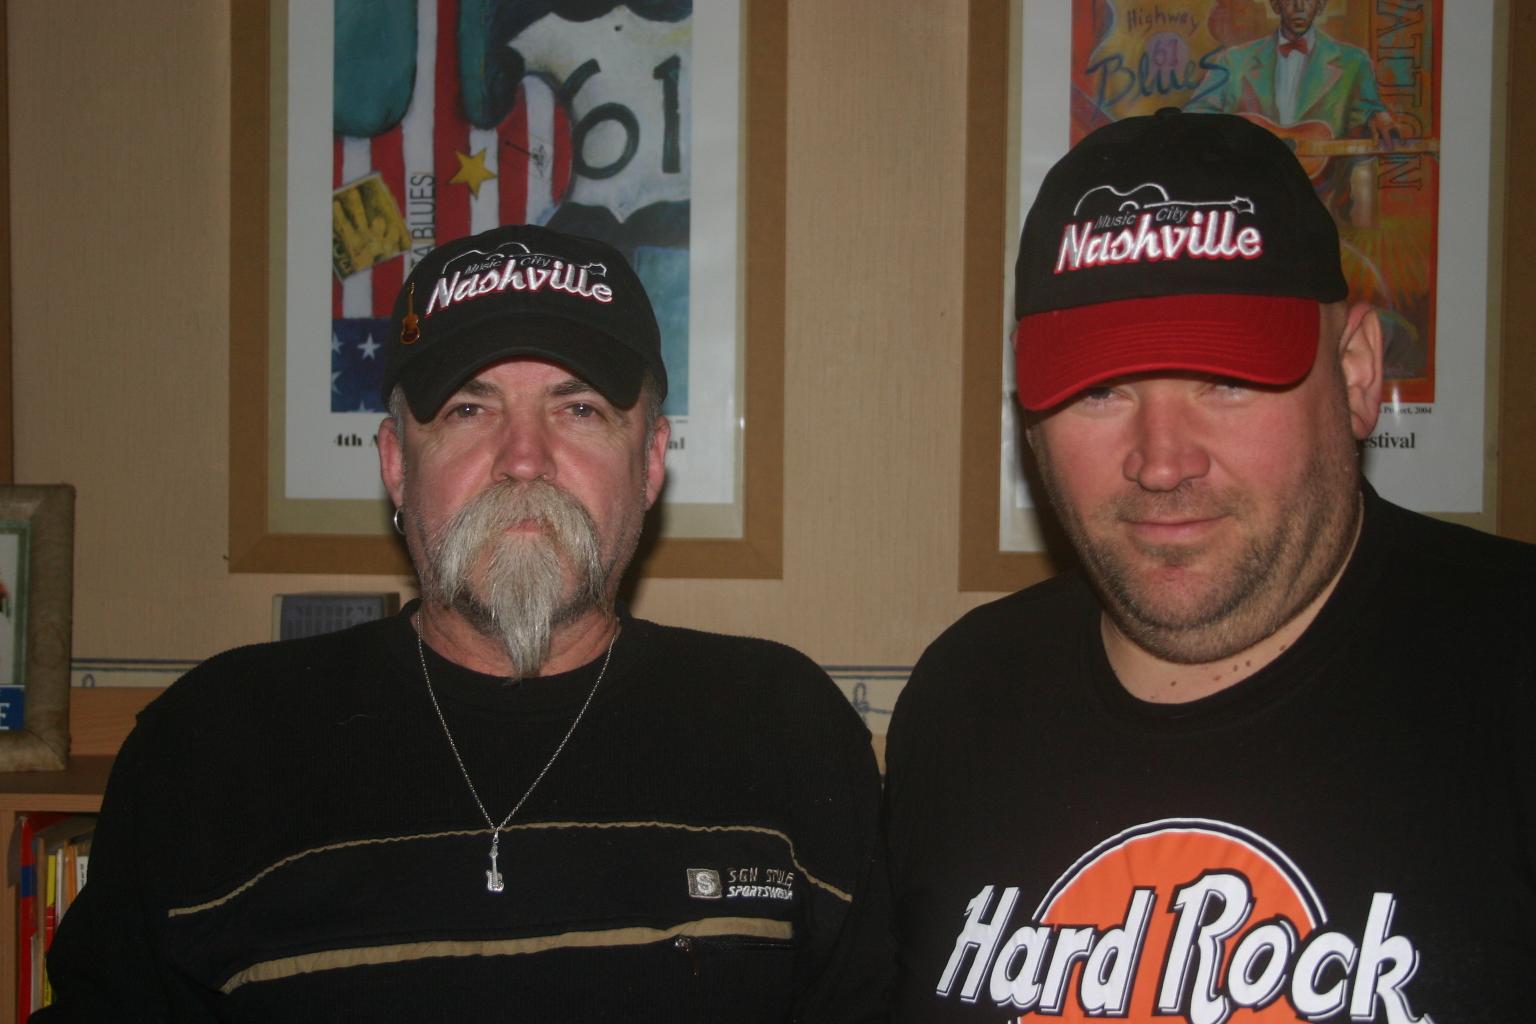 [Mike+and+friend+in+hats.jpg]